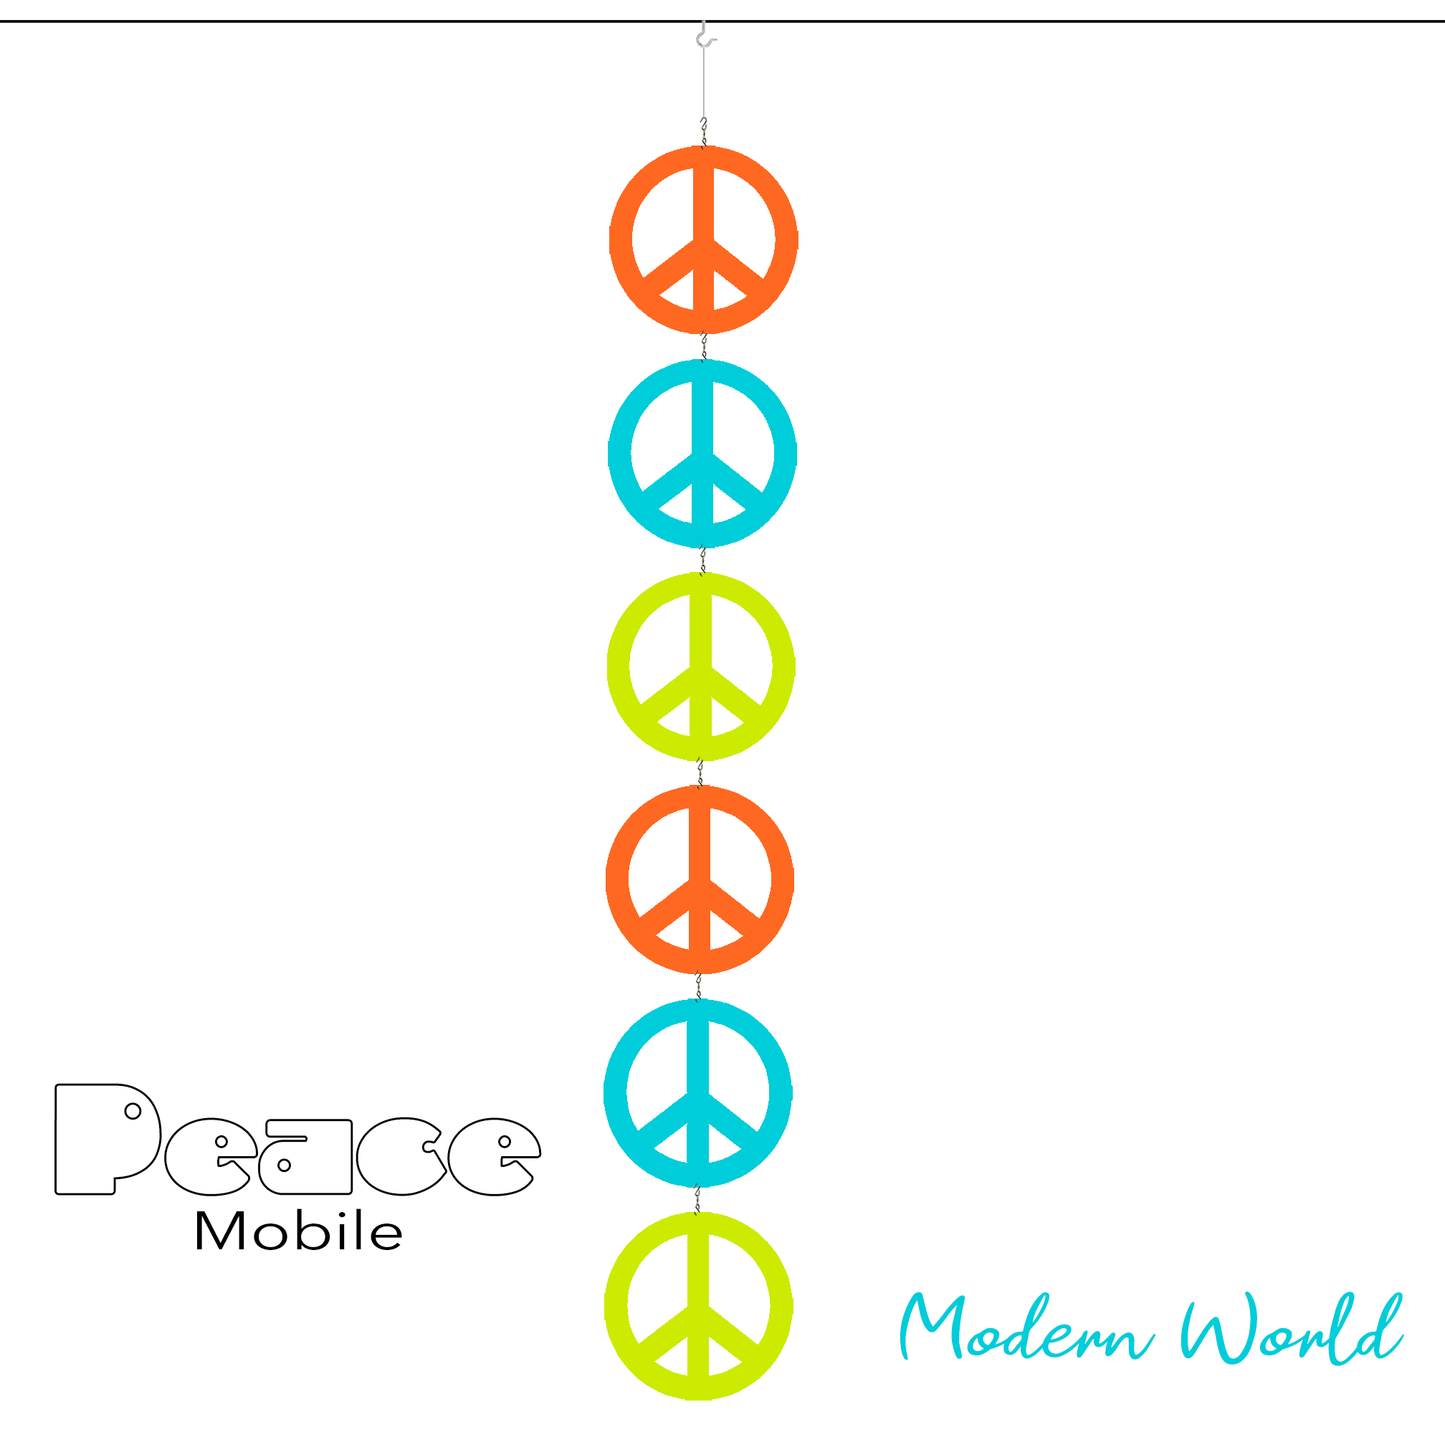 Modern World Peace Mobile - 6 Peace signs in Modern colors of Orange, Aqua Blue, and Lime Green - kinetic hanging art mobile symbolizes World Peace - by AtomicMobiles.com